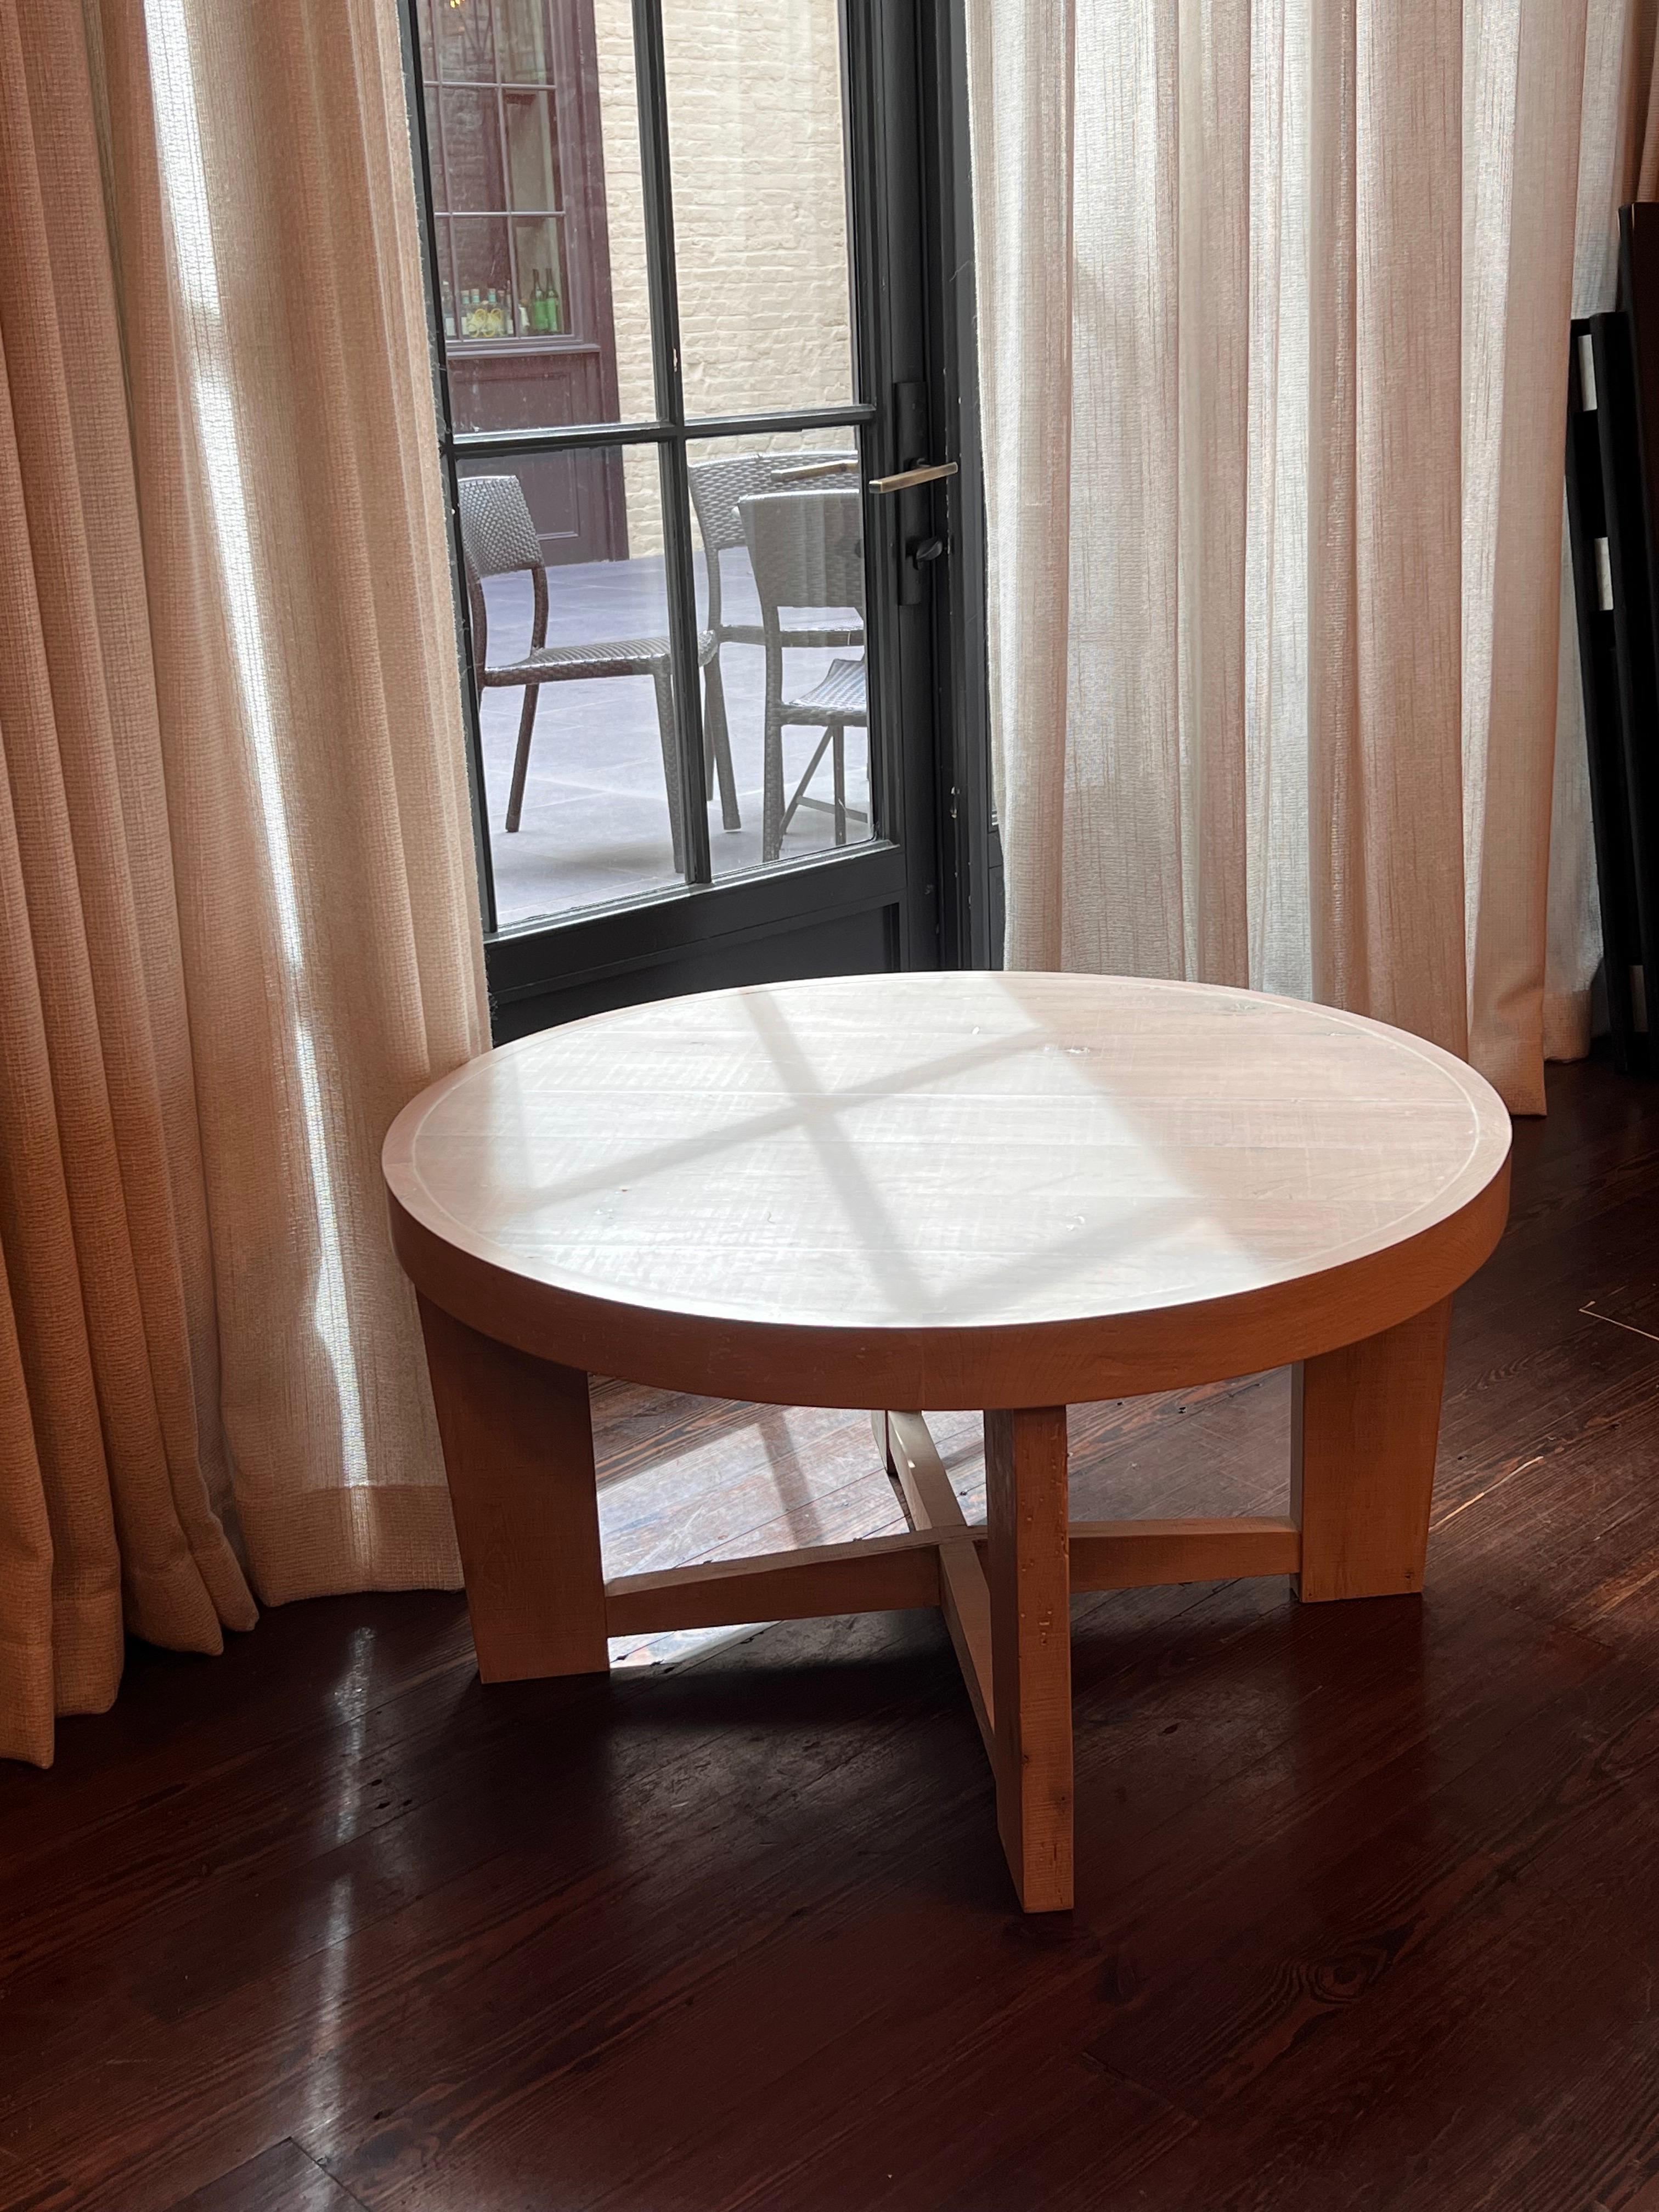 Modern Solid White Oak Handmade Coffee Table by Fortunata Design In Excellent Condition For Sale In Montgomery, AL